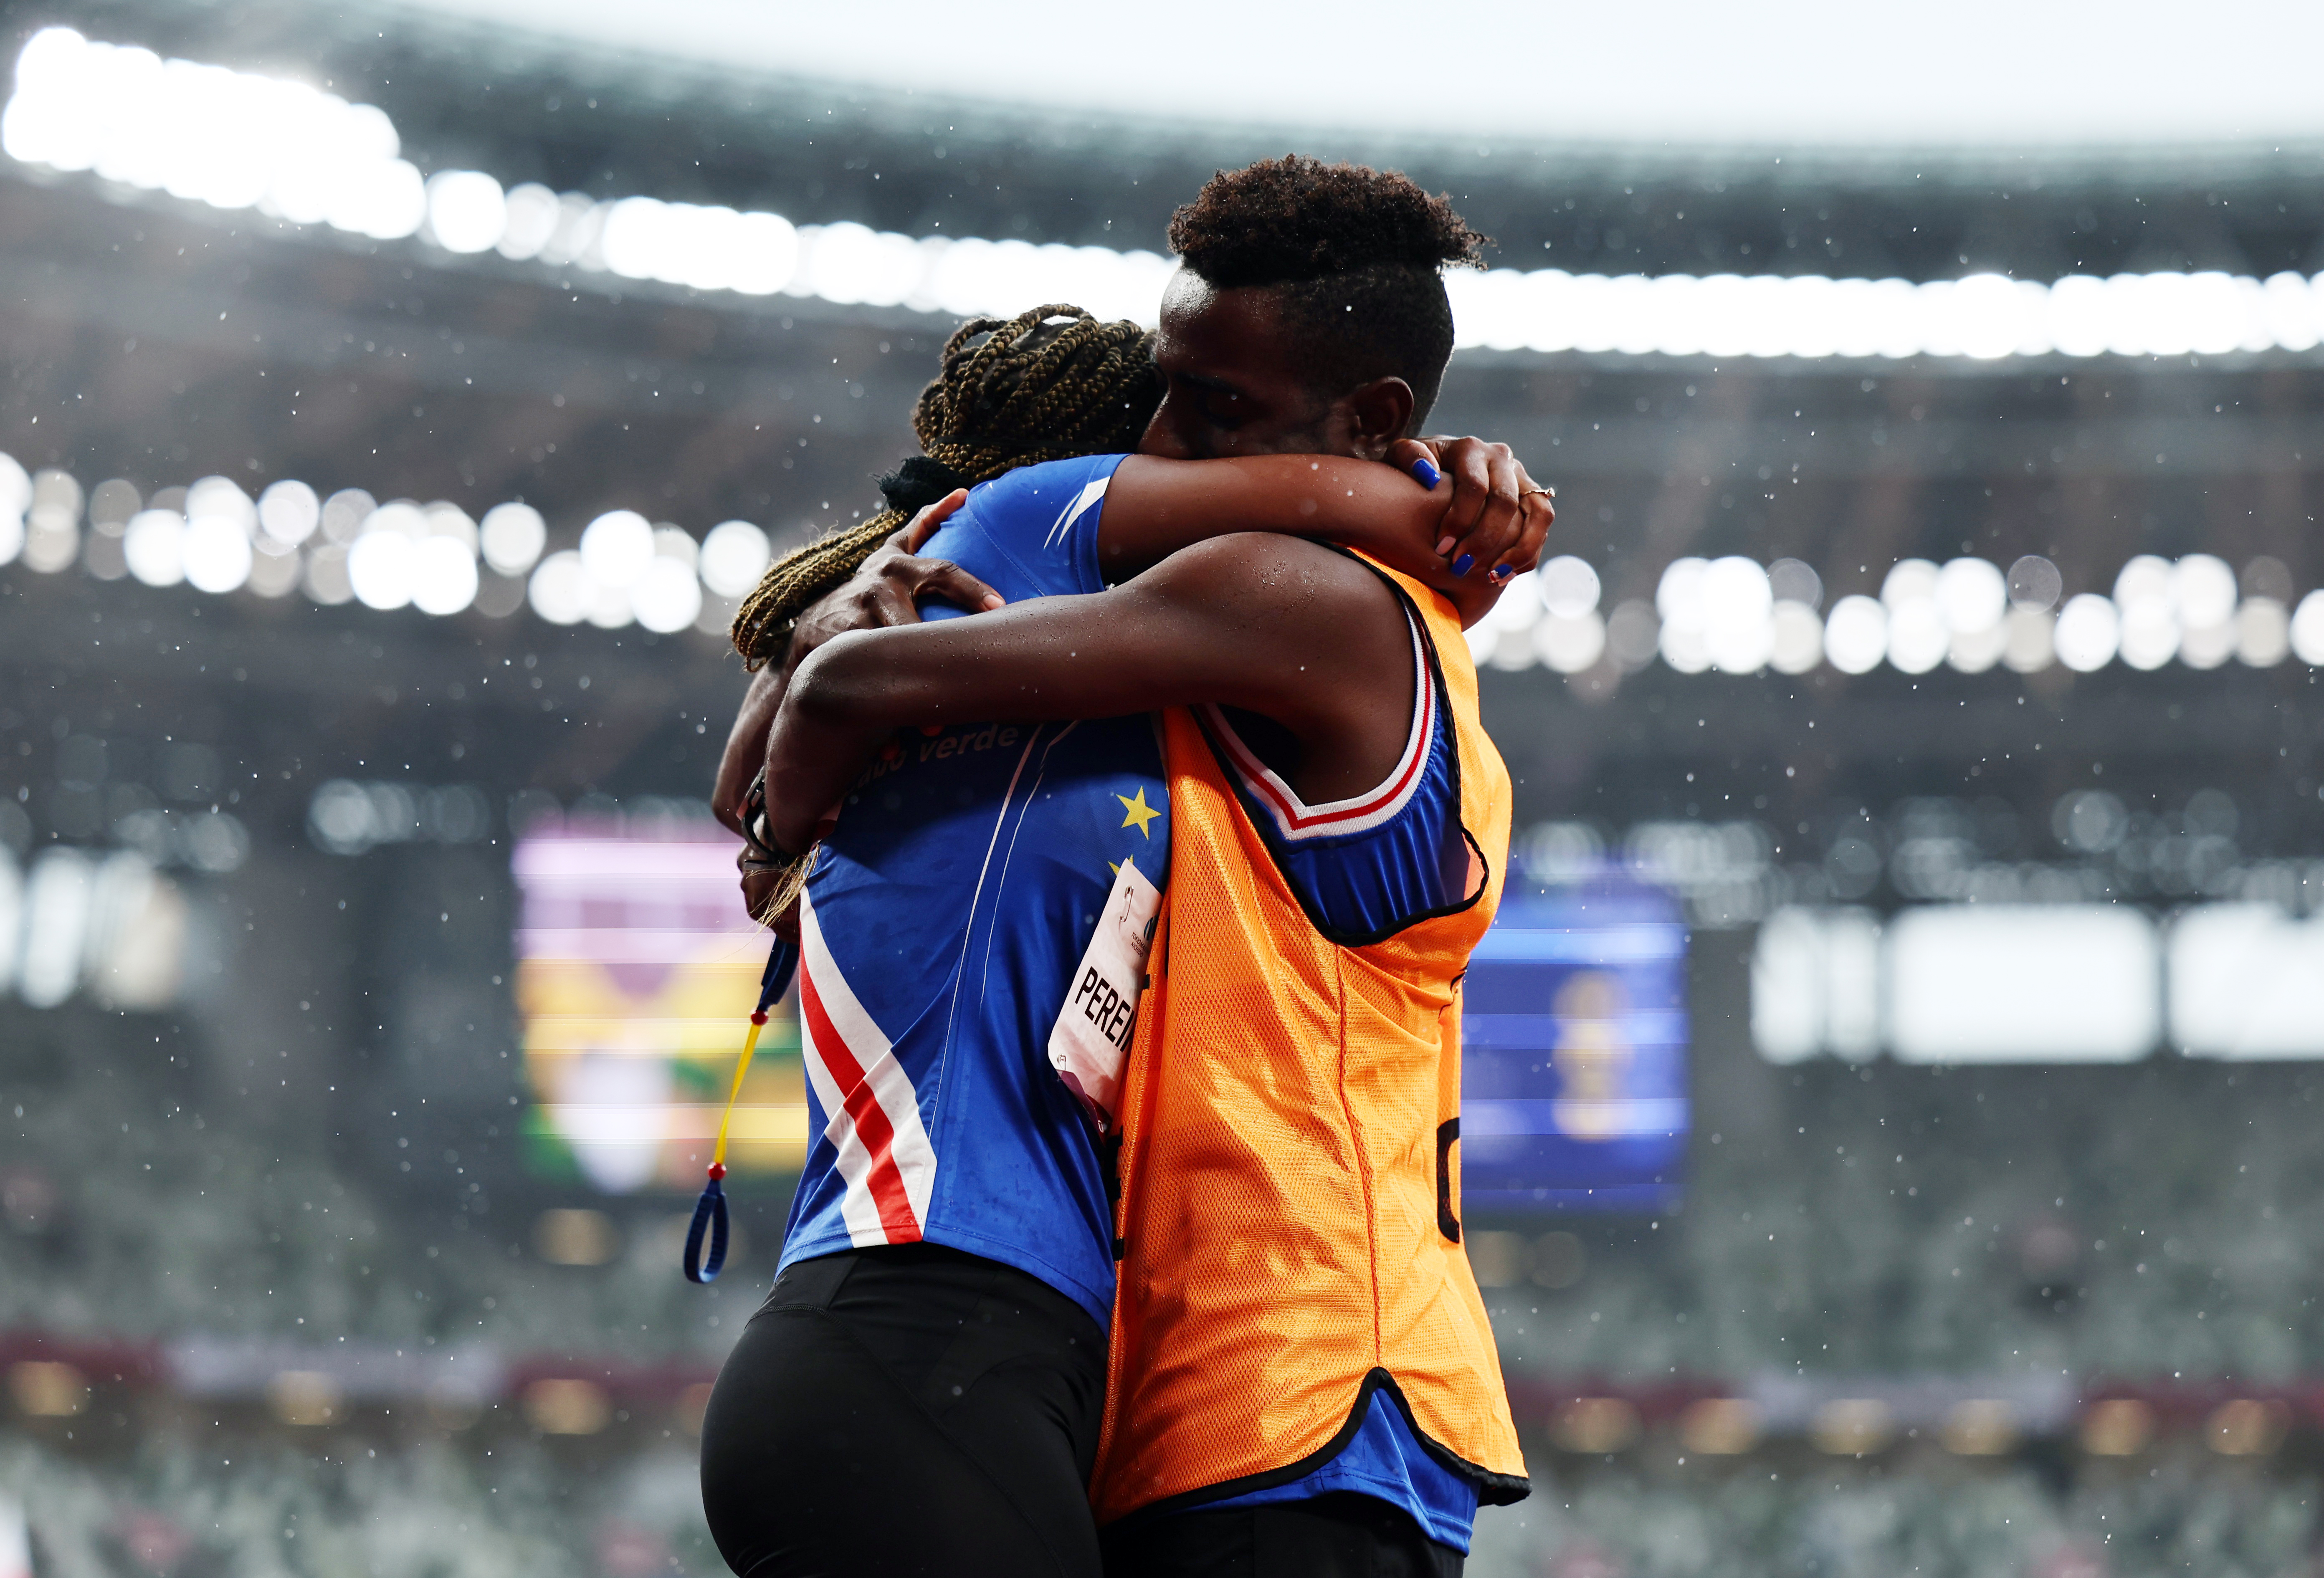 Tokyo 2020 Paralympic Games - Athletics - Women's 200m - T11 Round 1 - Heat 4 - Olympic Stadium, Tokyo, Japan - September 2, 2021. Keula Nidreia Pereira Semedo of Cape Verde and guide Manuel Antonio Vaz da Veiga embrace after he proposed to her after competing REUTERS/Athit Perawongmetha